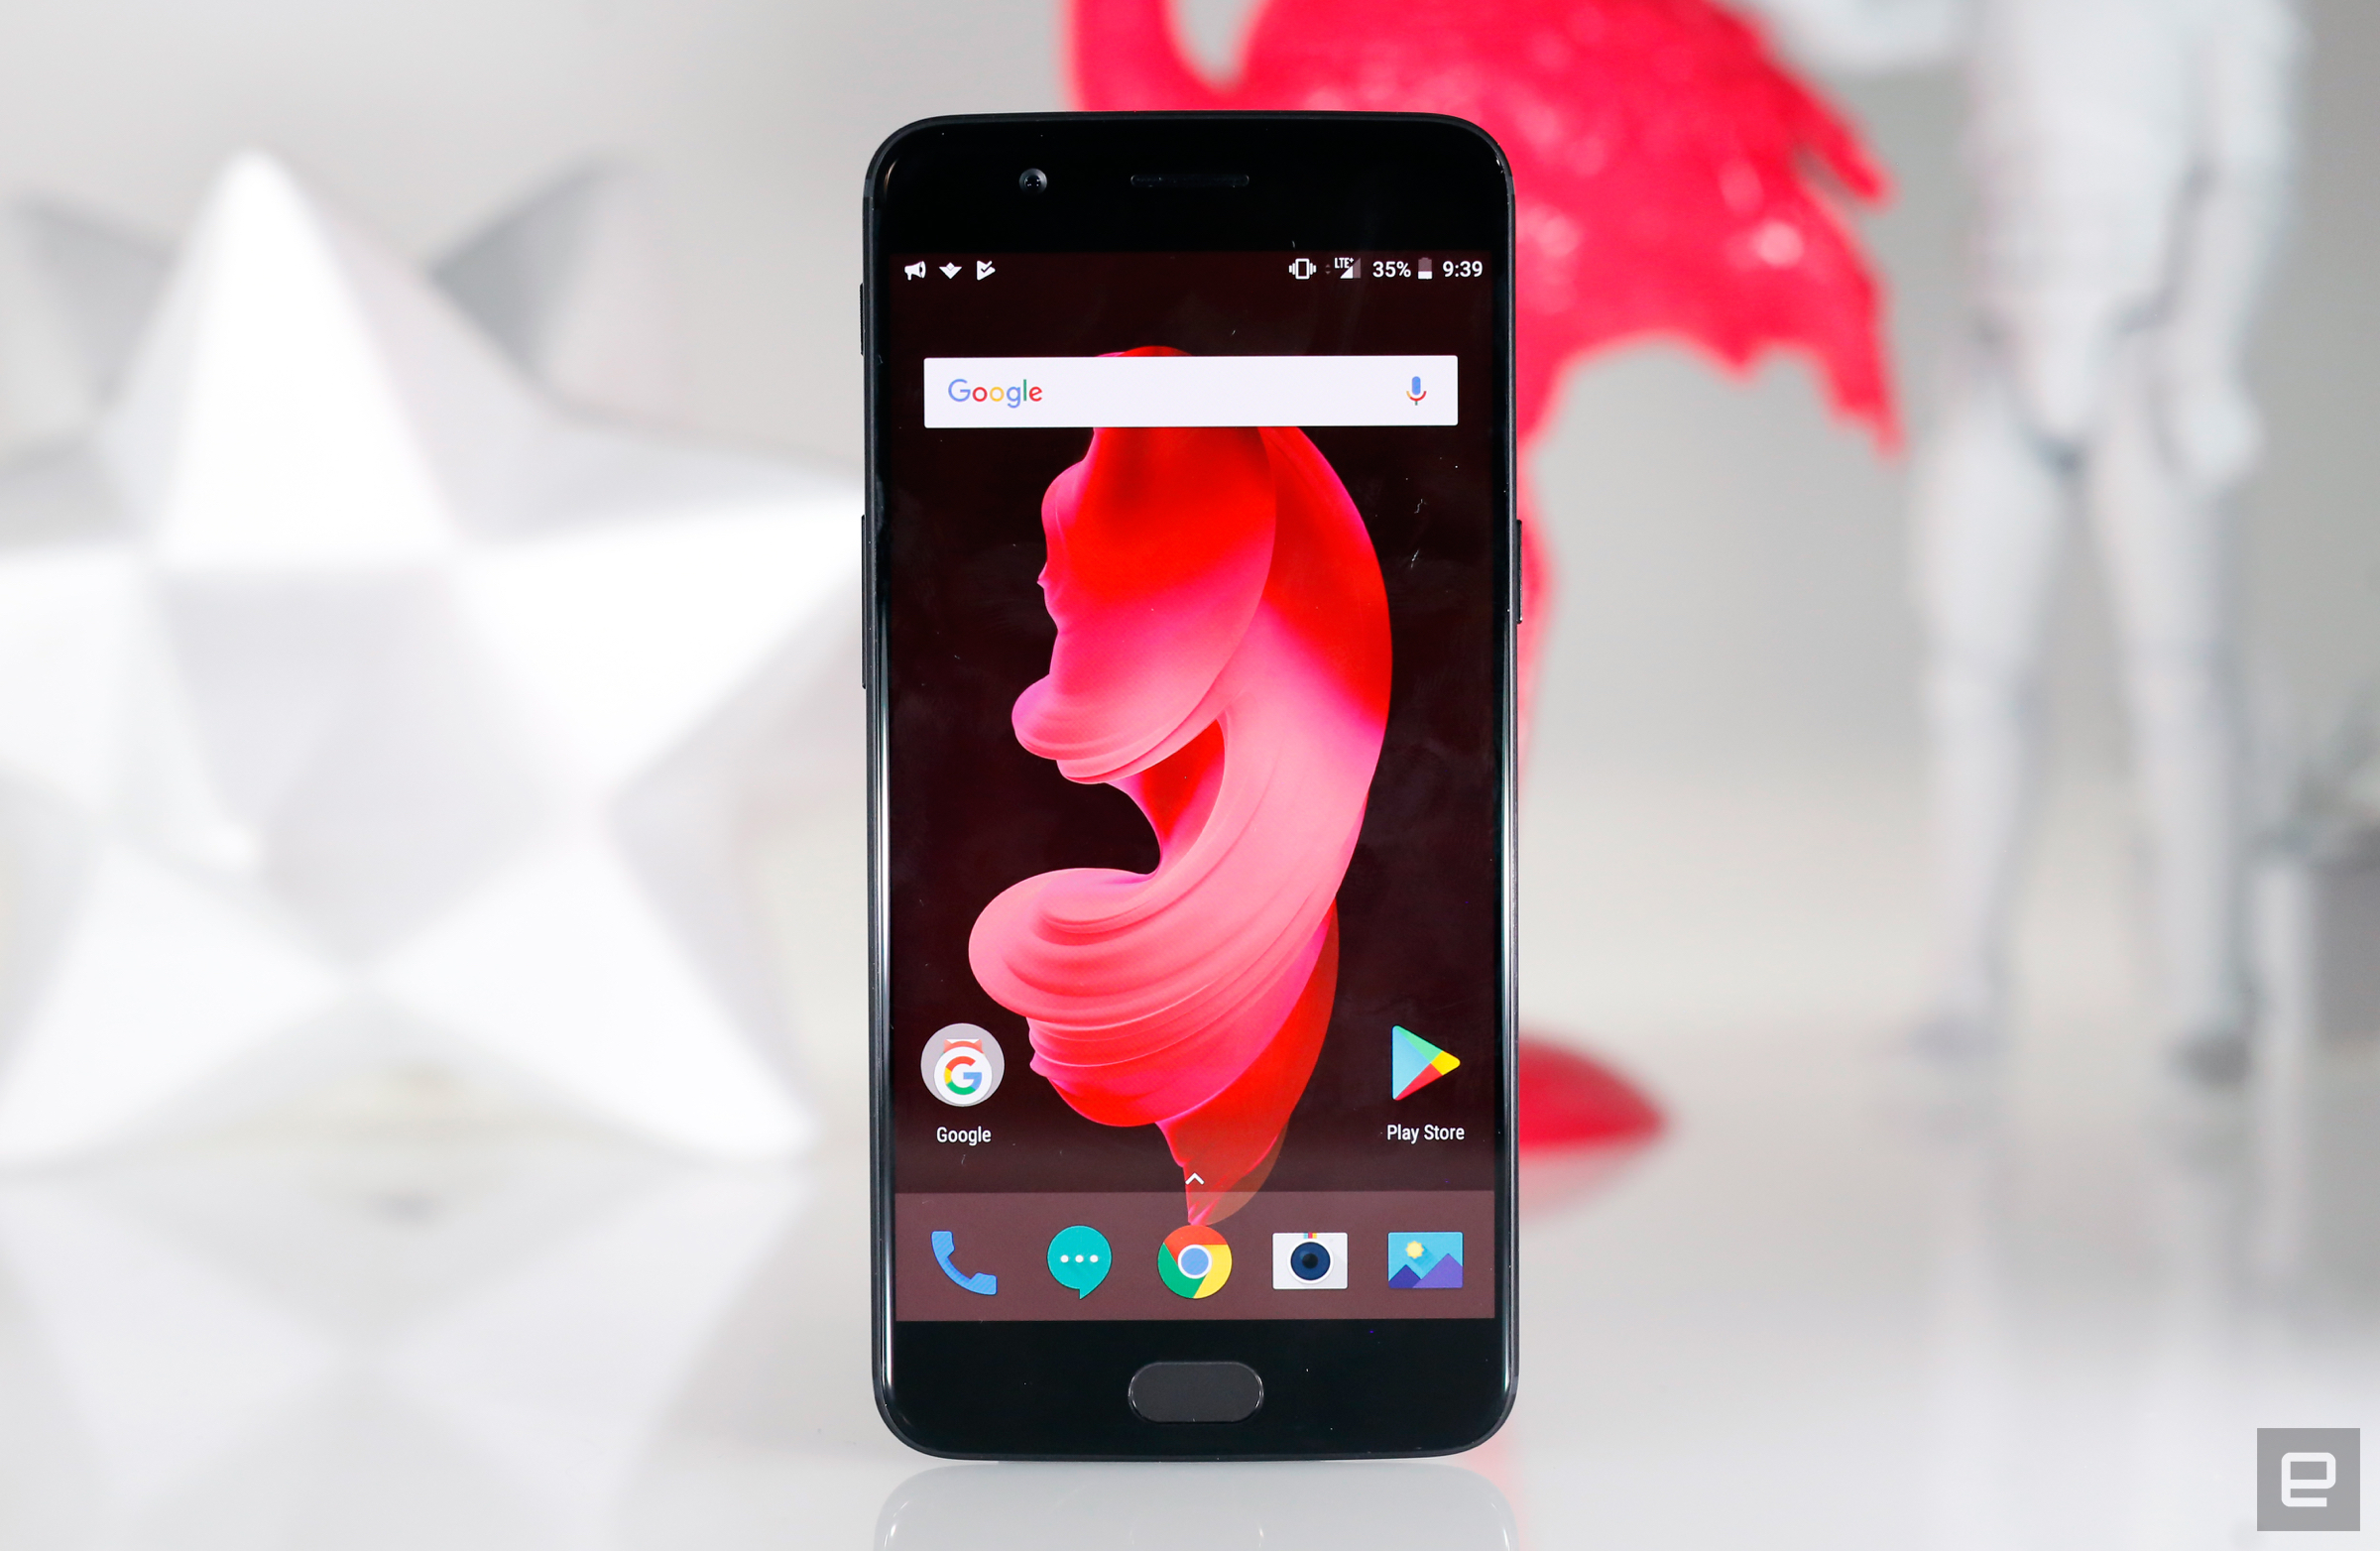 OnePlus 5 review: Making the leap from good to great